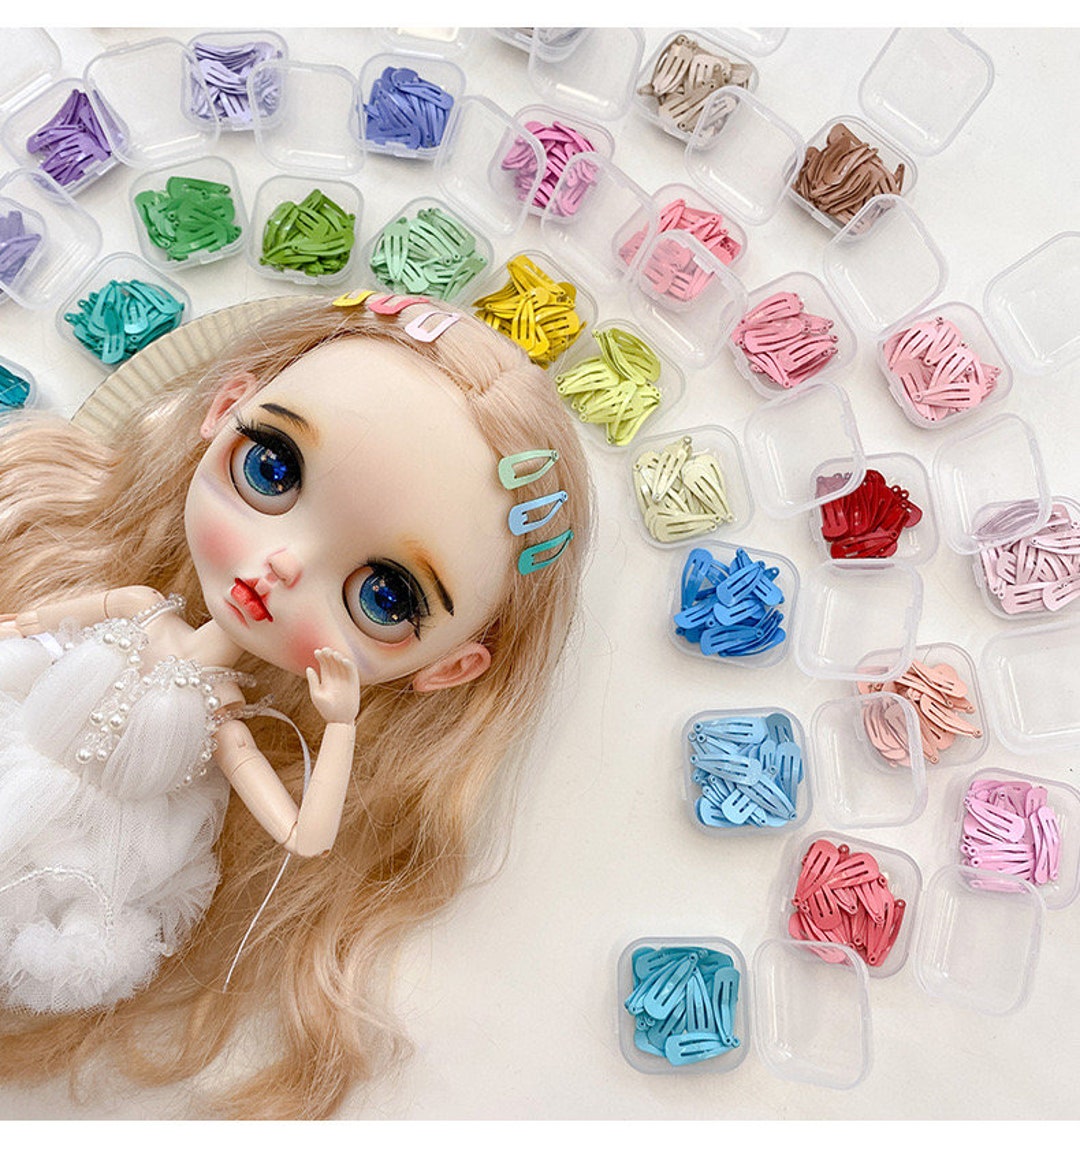 Blythe Doll: Most Up-to-Date Encyclopedia, News & Reviews